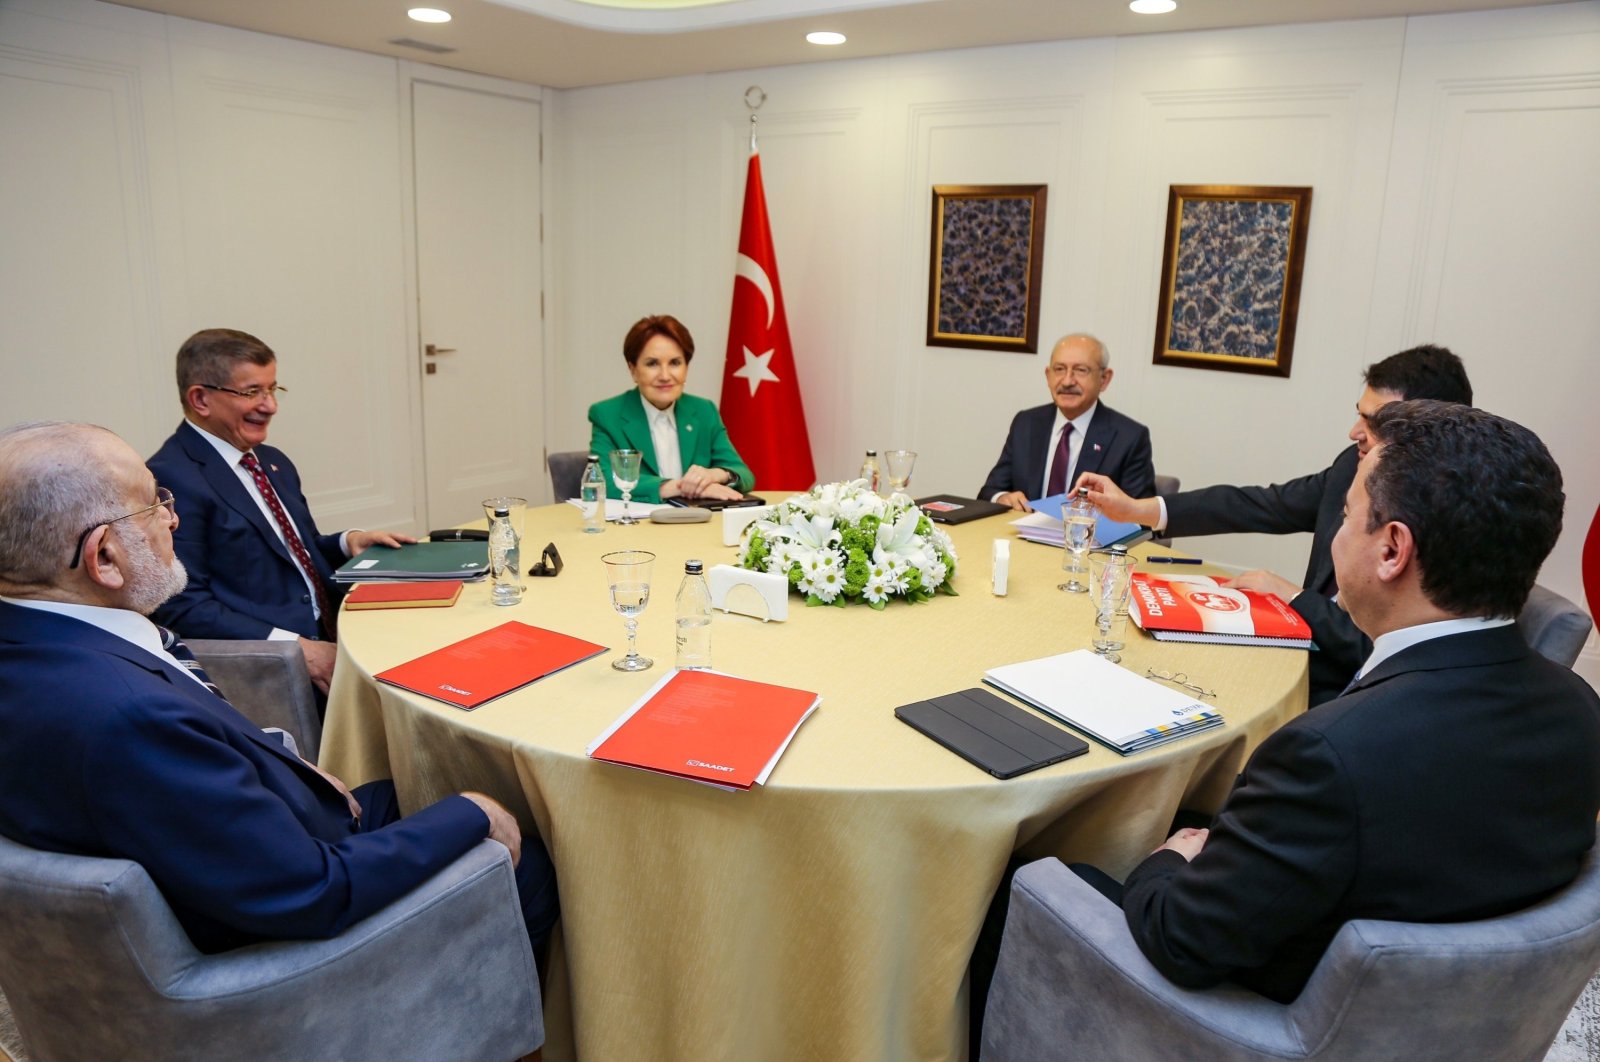 Representatives from Türkiye&#039;s six opposition parties known as "table for six" (L-R): The Felicity Party (SP) Chairperson Temel Karamollaoğlu, Future Party (GP) Chairperson Ahmet Davutoğlu, Good Party (IP) Chairperson Meral Akşener, the Republican People&#039;s Party (CHP) Chairperson Kemal Kılıçdaroğlu, Democrat Party (DP) Chairperson Gültekin Uysal and Democracy and Progress Party (DEVA) Chairperson Ali Babacan pose ahead of a meeting, in capital Ankara, Türkiye, Jan. 5, 2022. (IHA Photo)